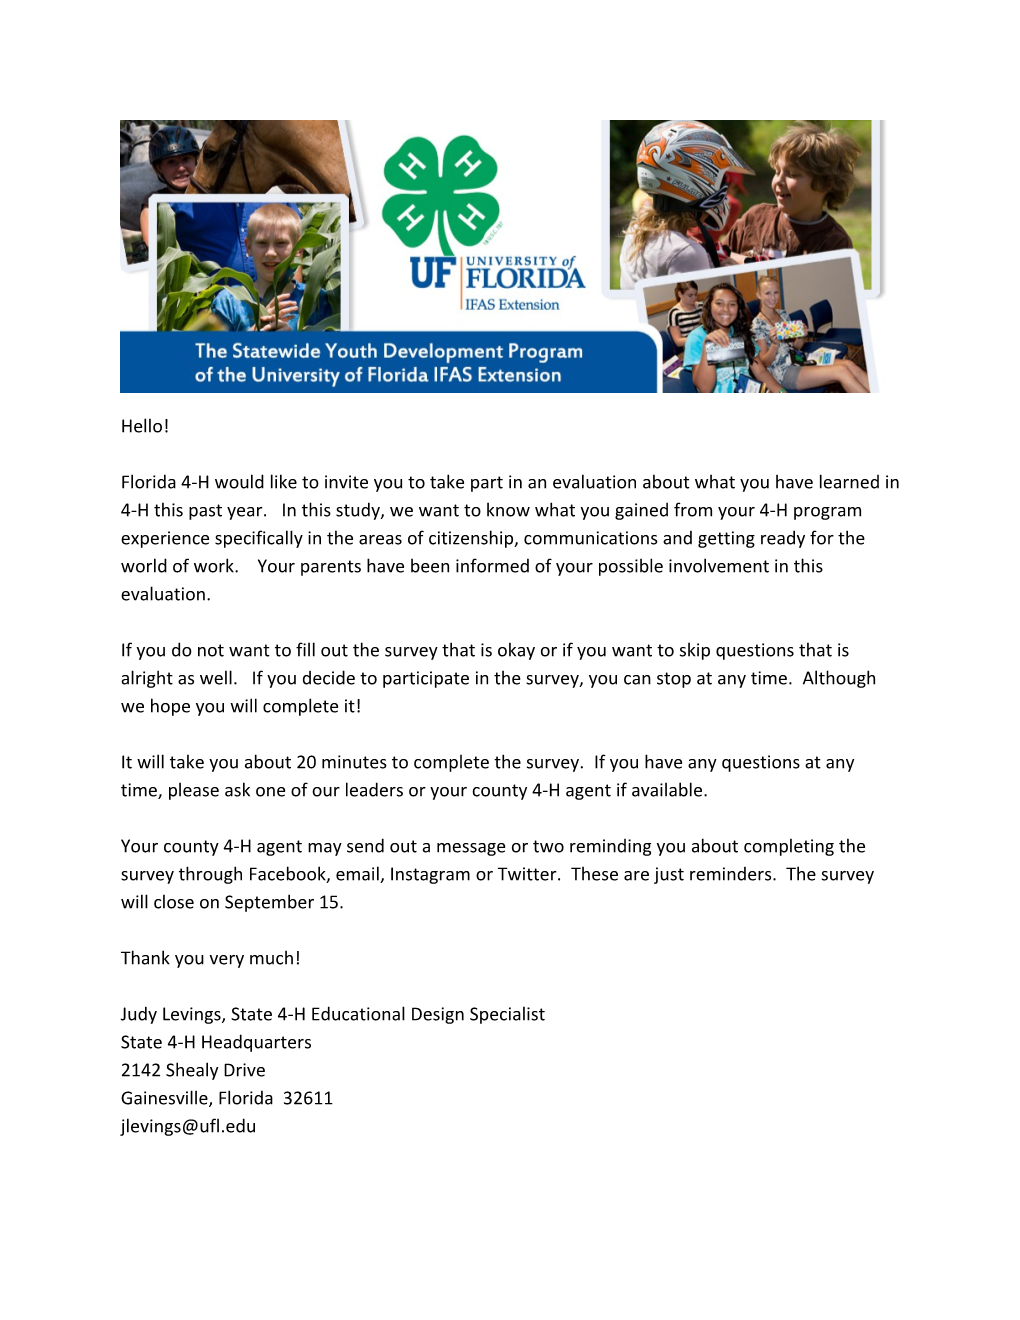 Florida 4-H Would Like to Invite You to Take Part in an Evaluation About What You Have